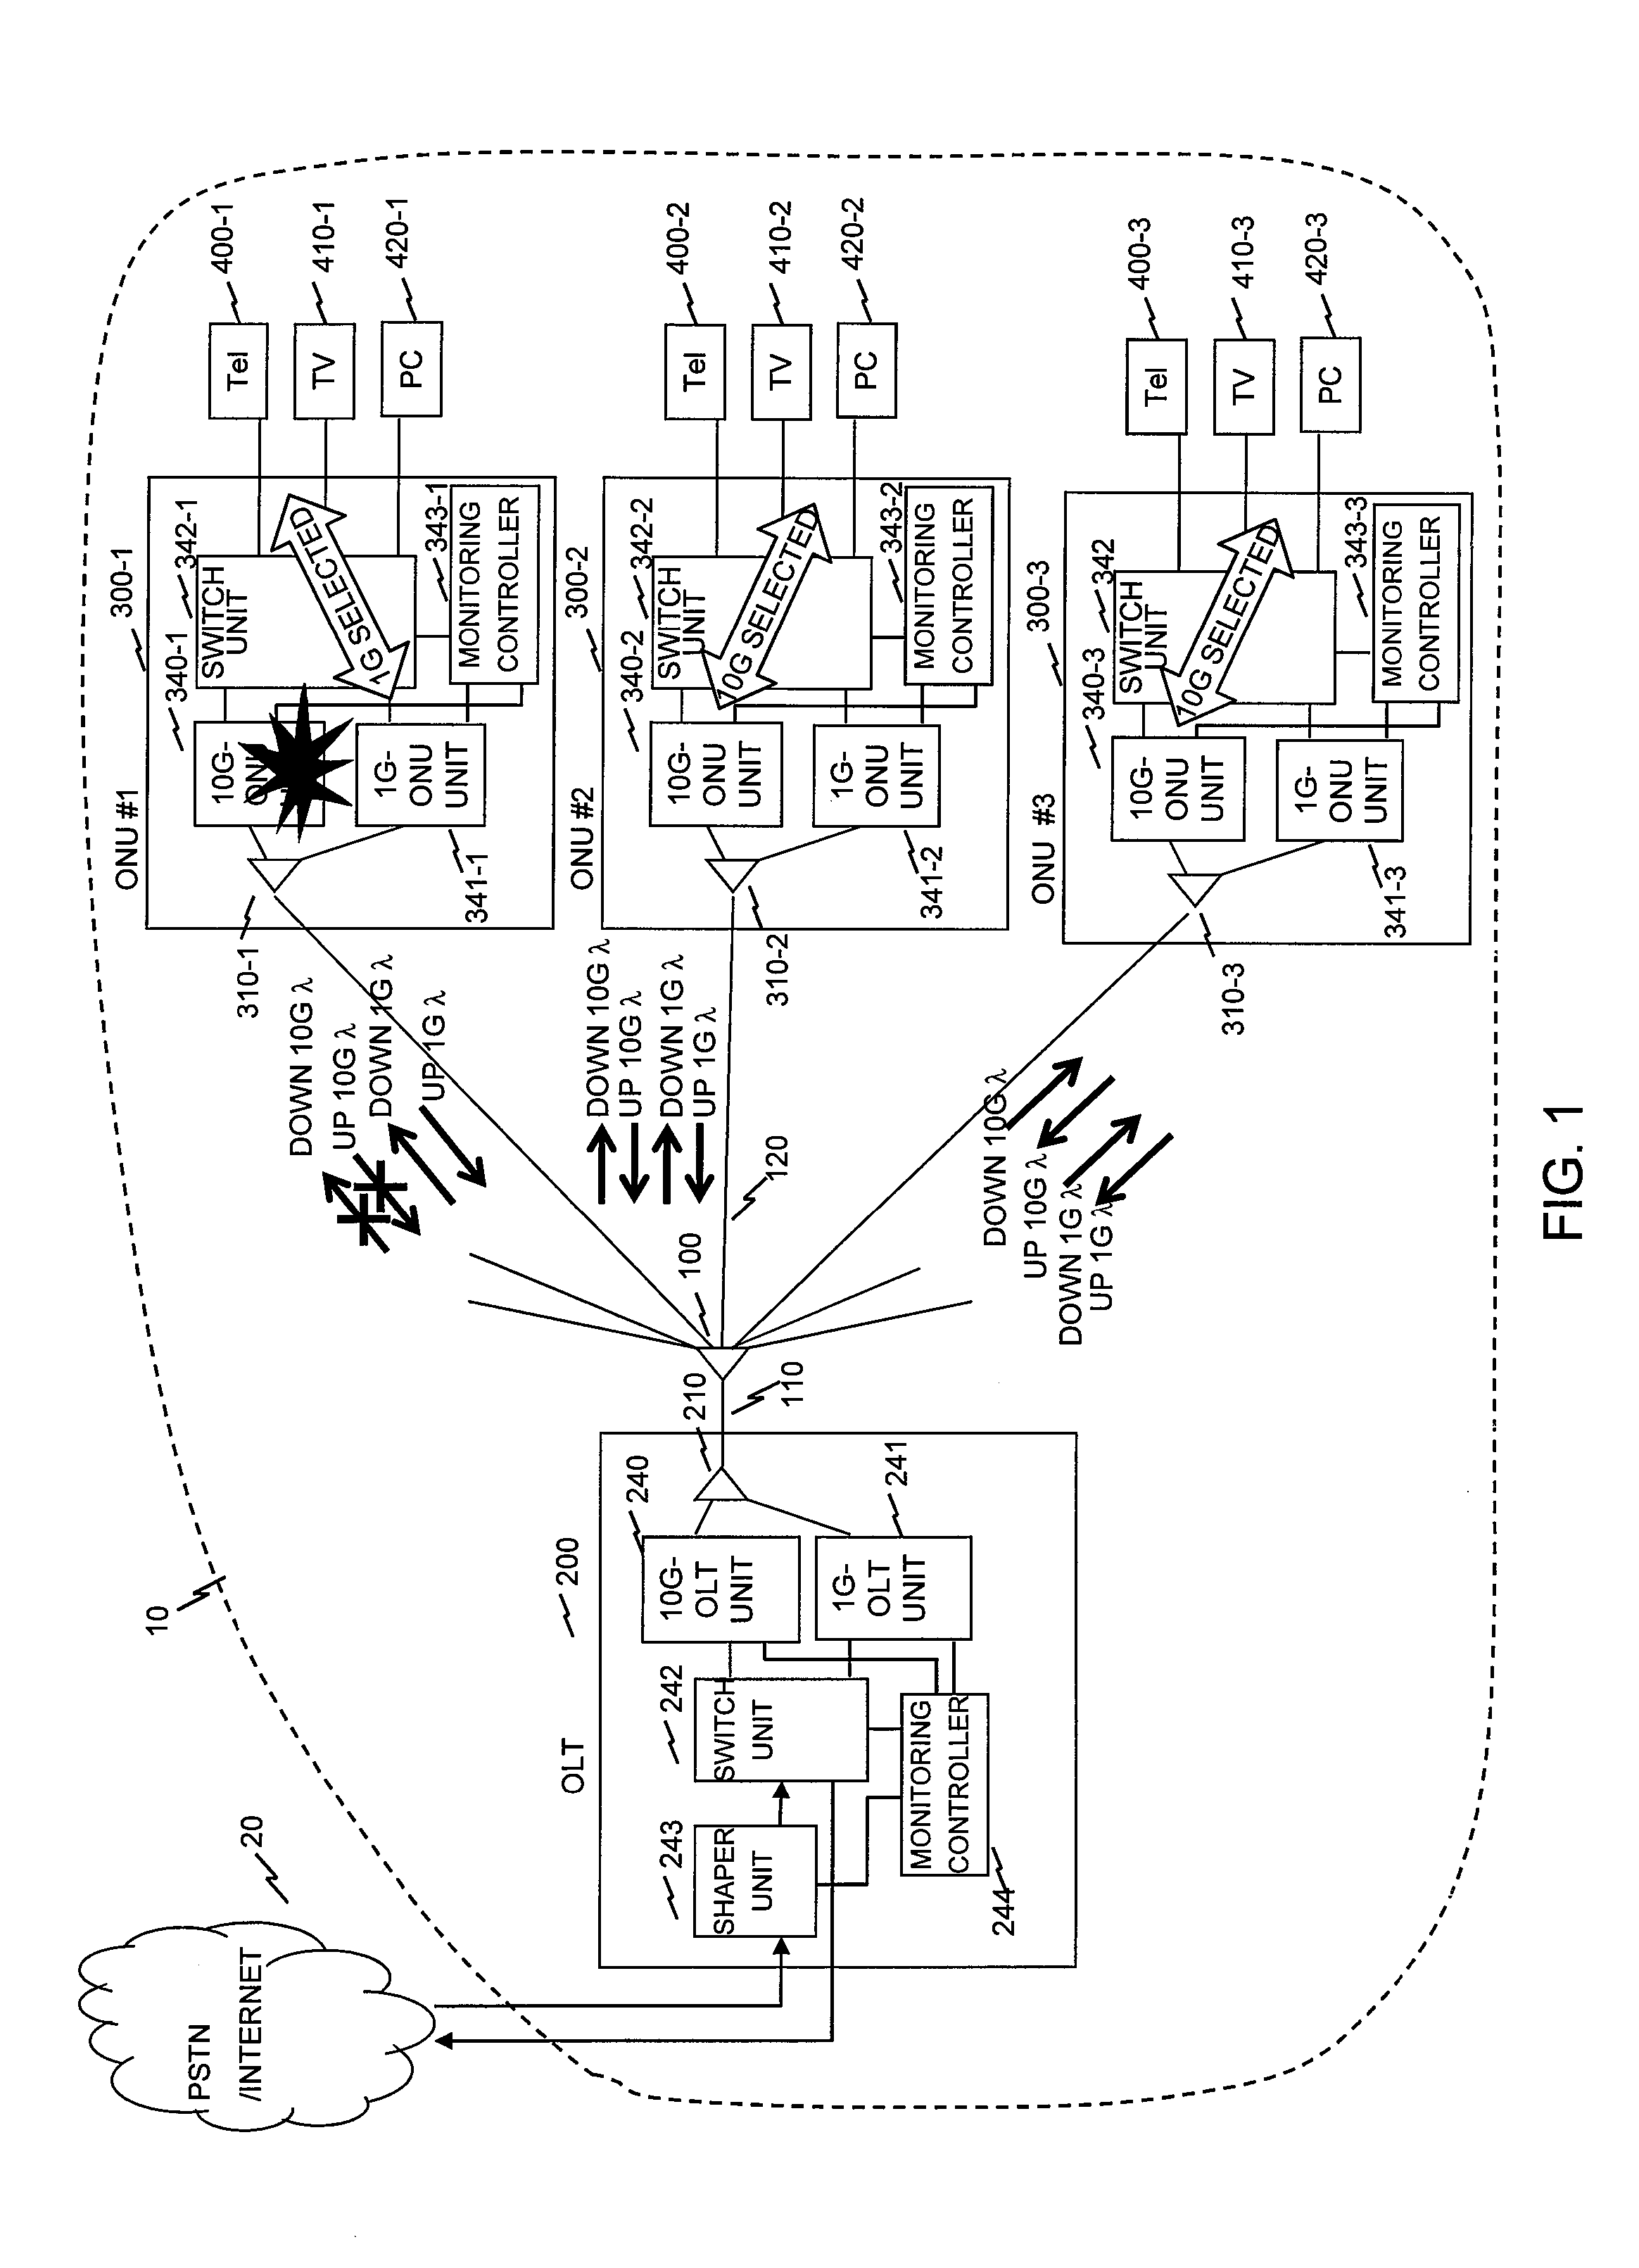 Passive optical network system and optical line terminal